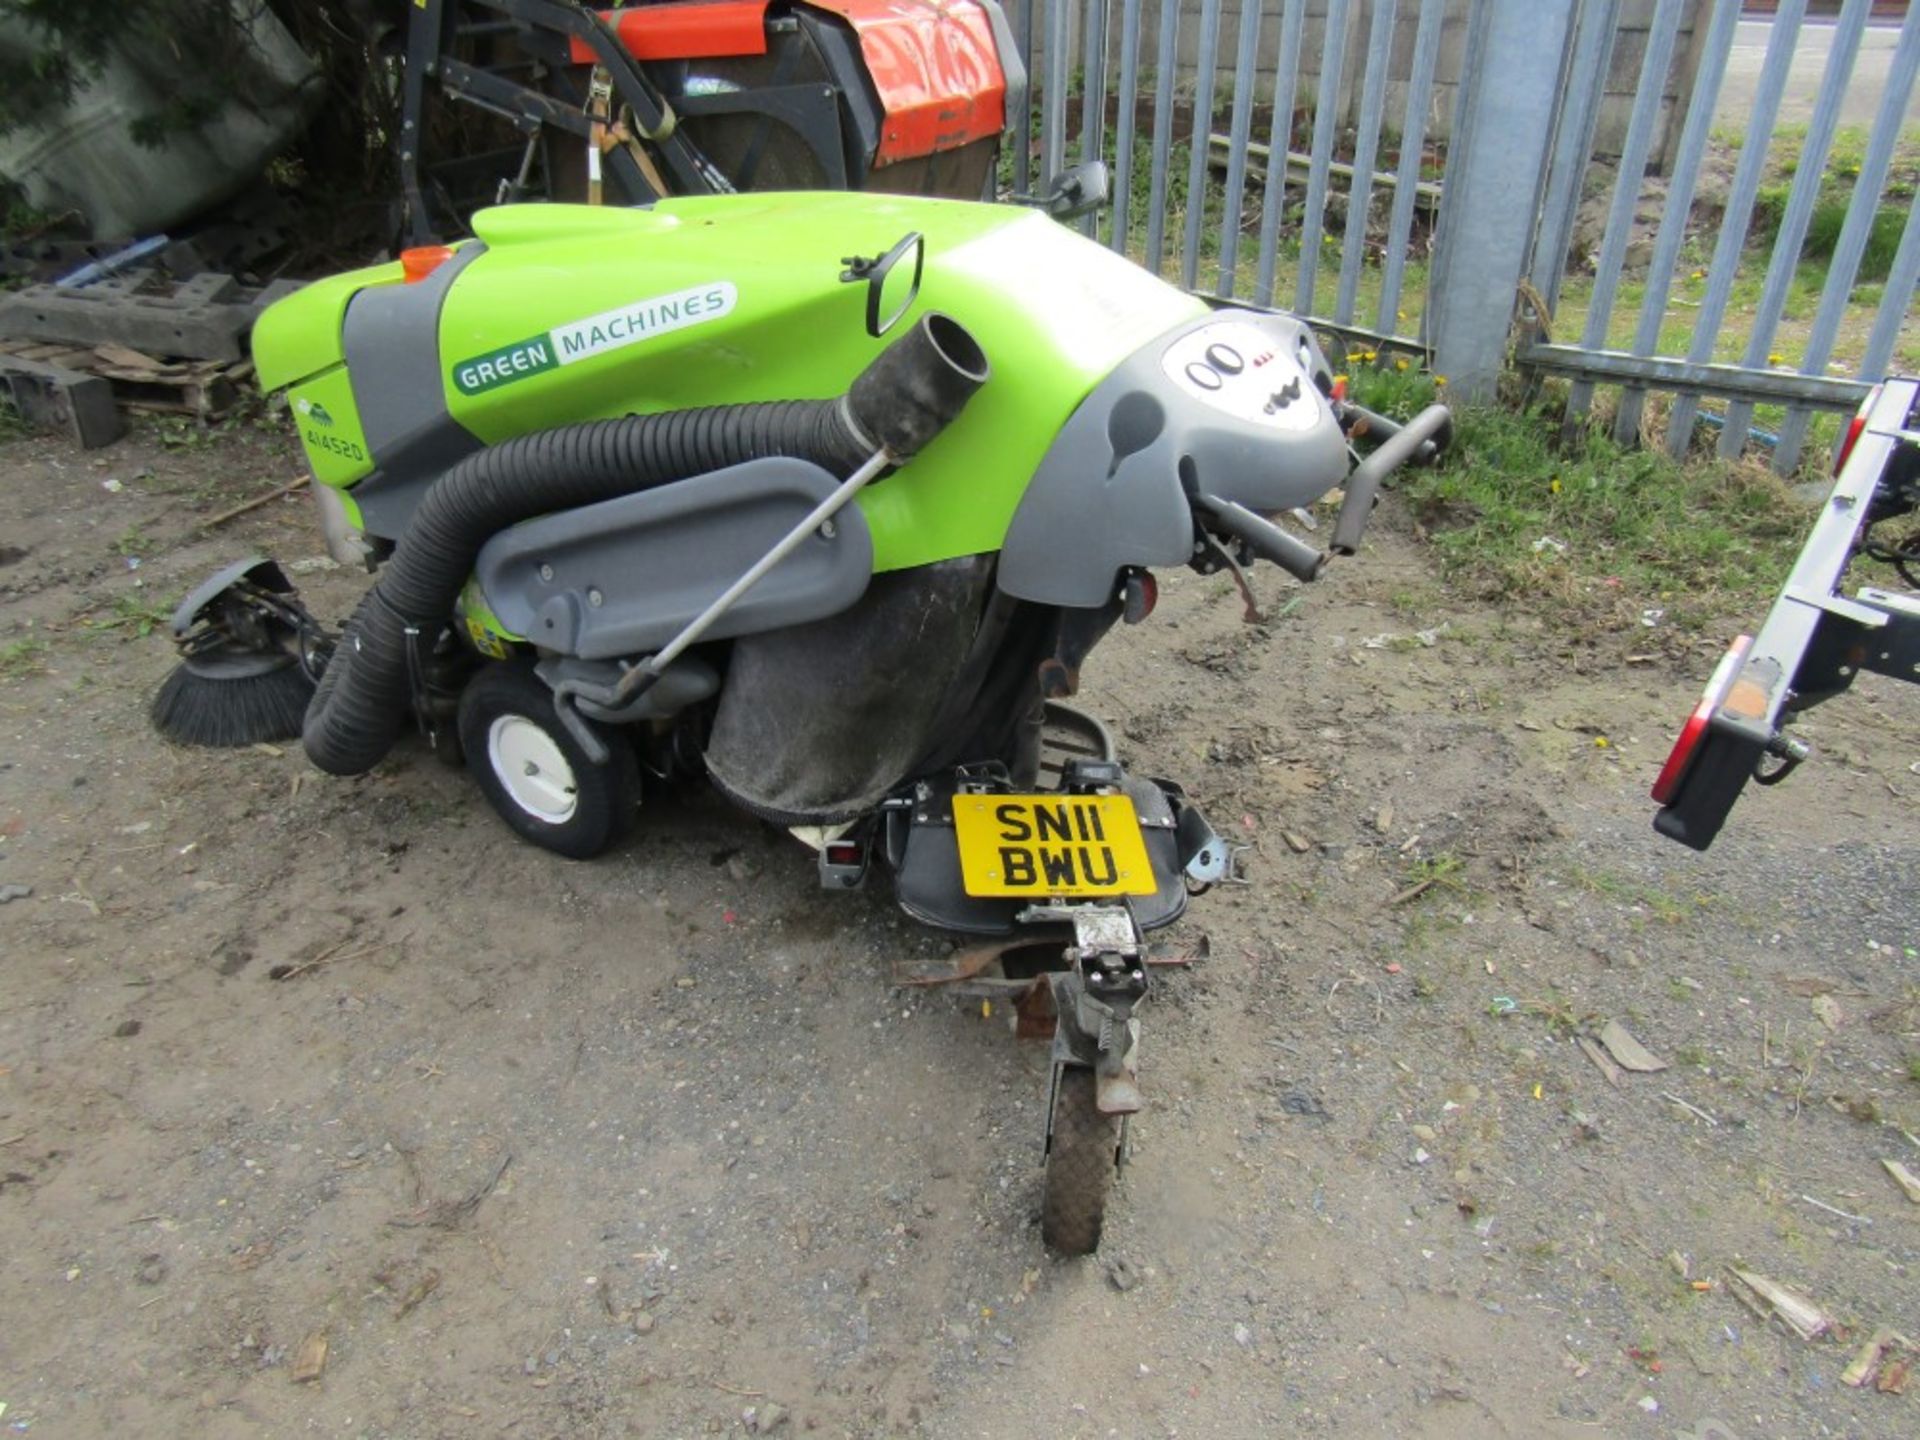 11 reg GREEN MACHINE 414S2D STREET CLEANING RIDE ON TRICYCLE, 1ST REG 05/11, 204 HOURS WARRANTED, V5 - Image 2 of 3